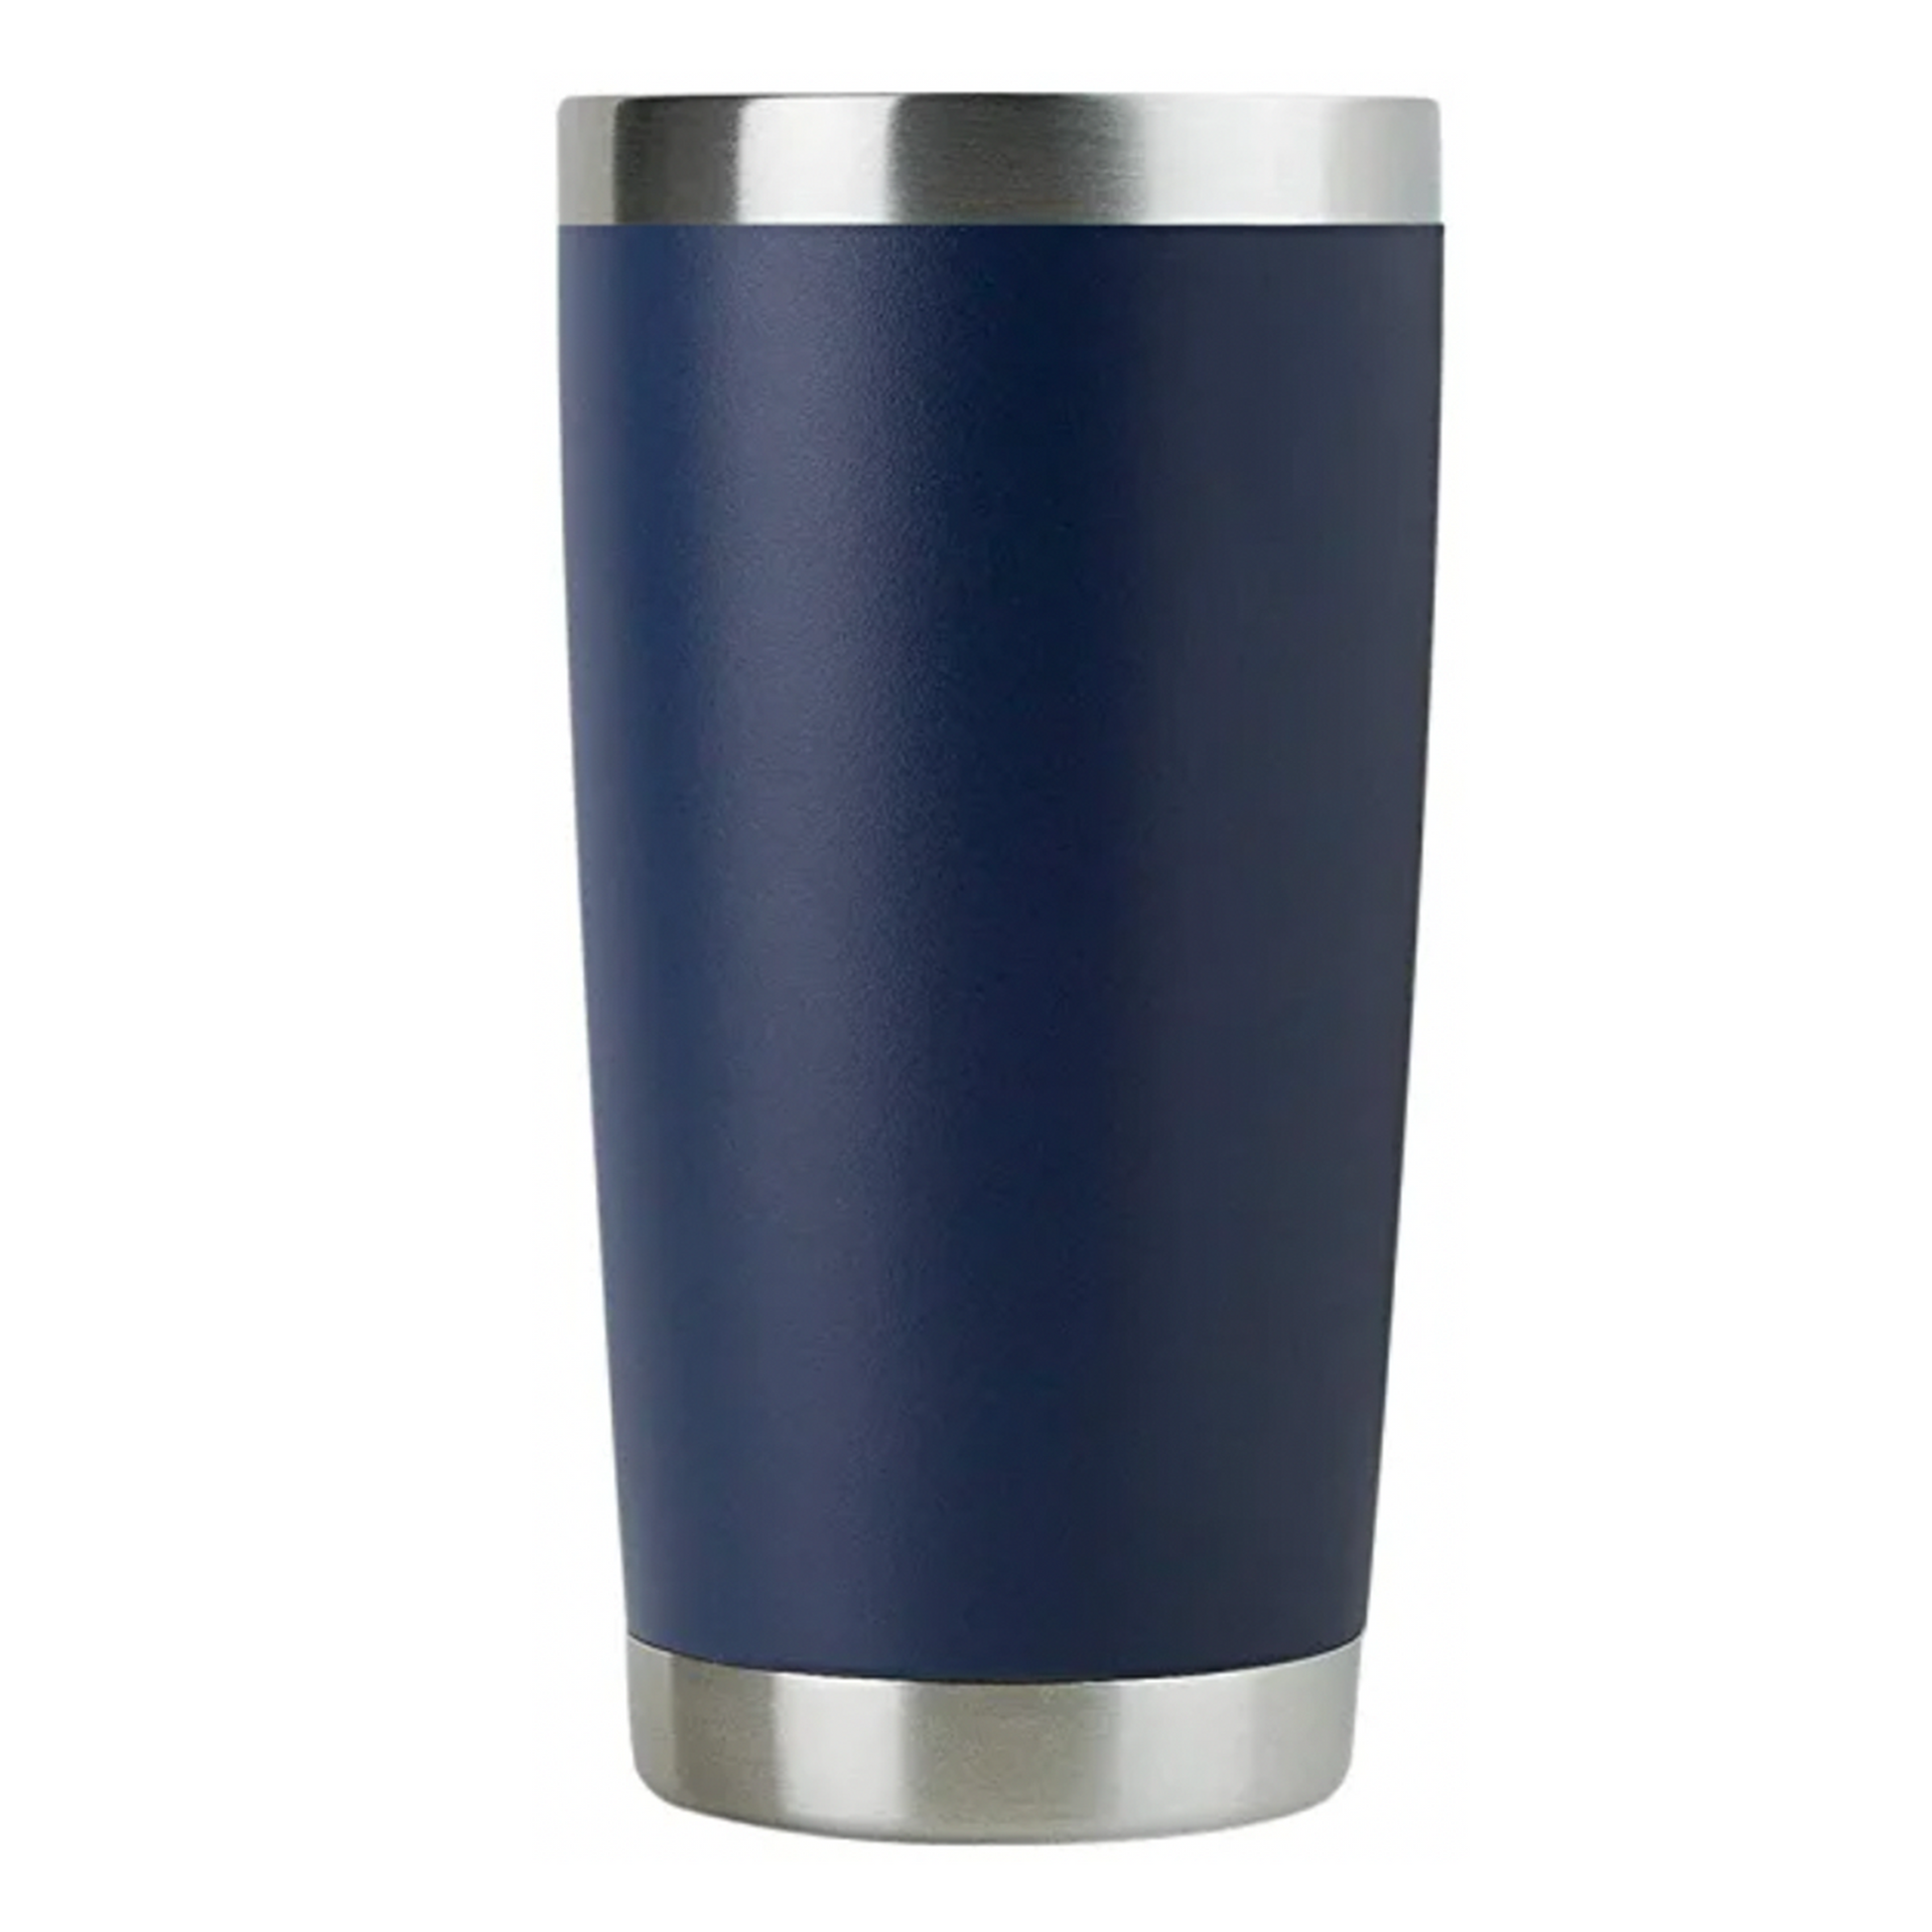 20 oz Insulated Stainless Steel Tumbler with Sure Grip Design